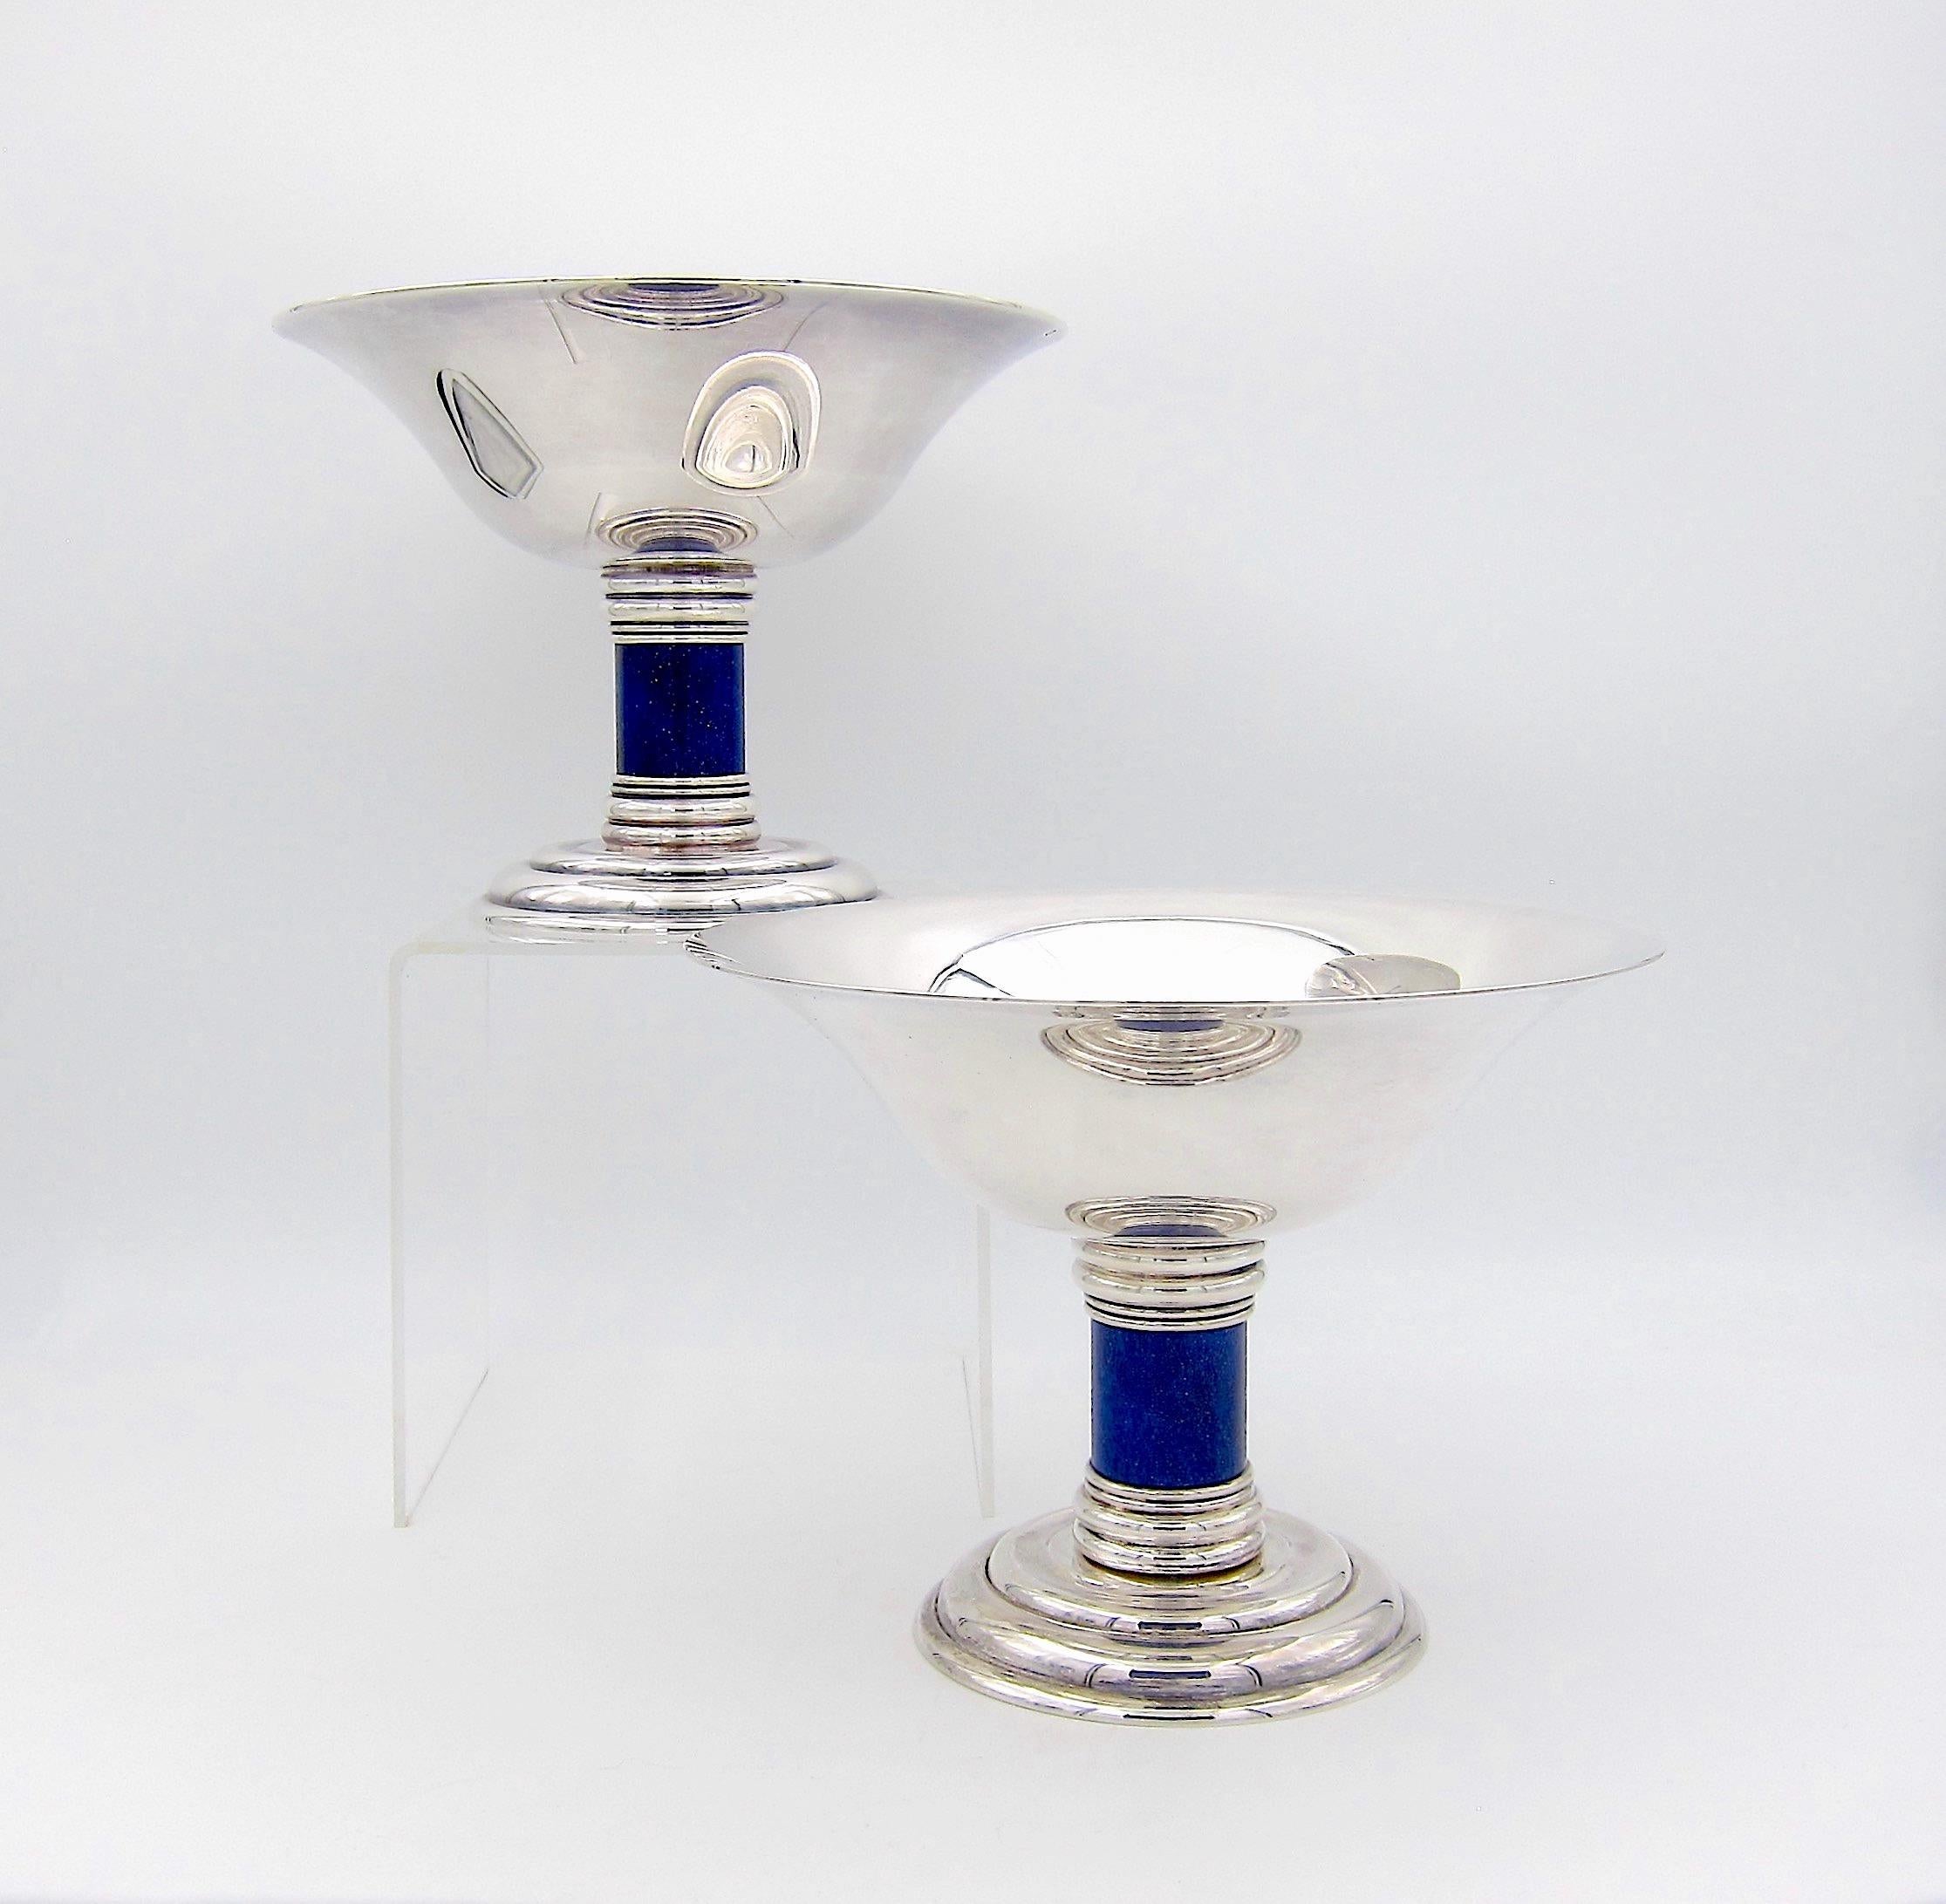 A large and elegant Art Deco compote / tazza pair designed by Jean E. Puiforcat (1897-1945) in the 1930s for renowned French silversmiths Puiforcat of Paris; the firm produced the form for several decades during the 20th century. The silver plated